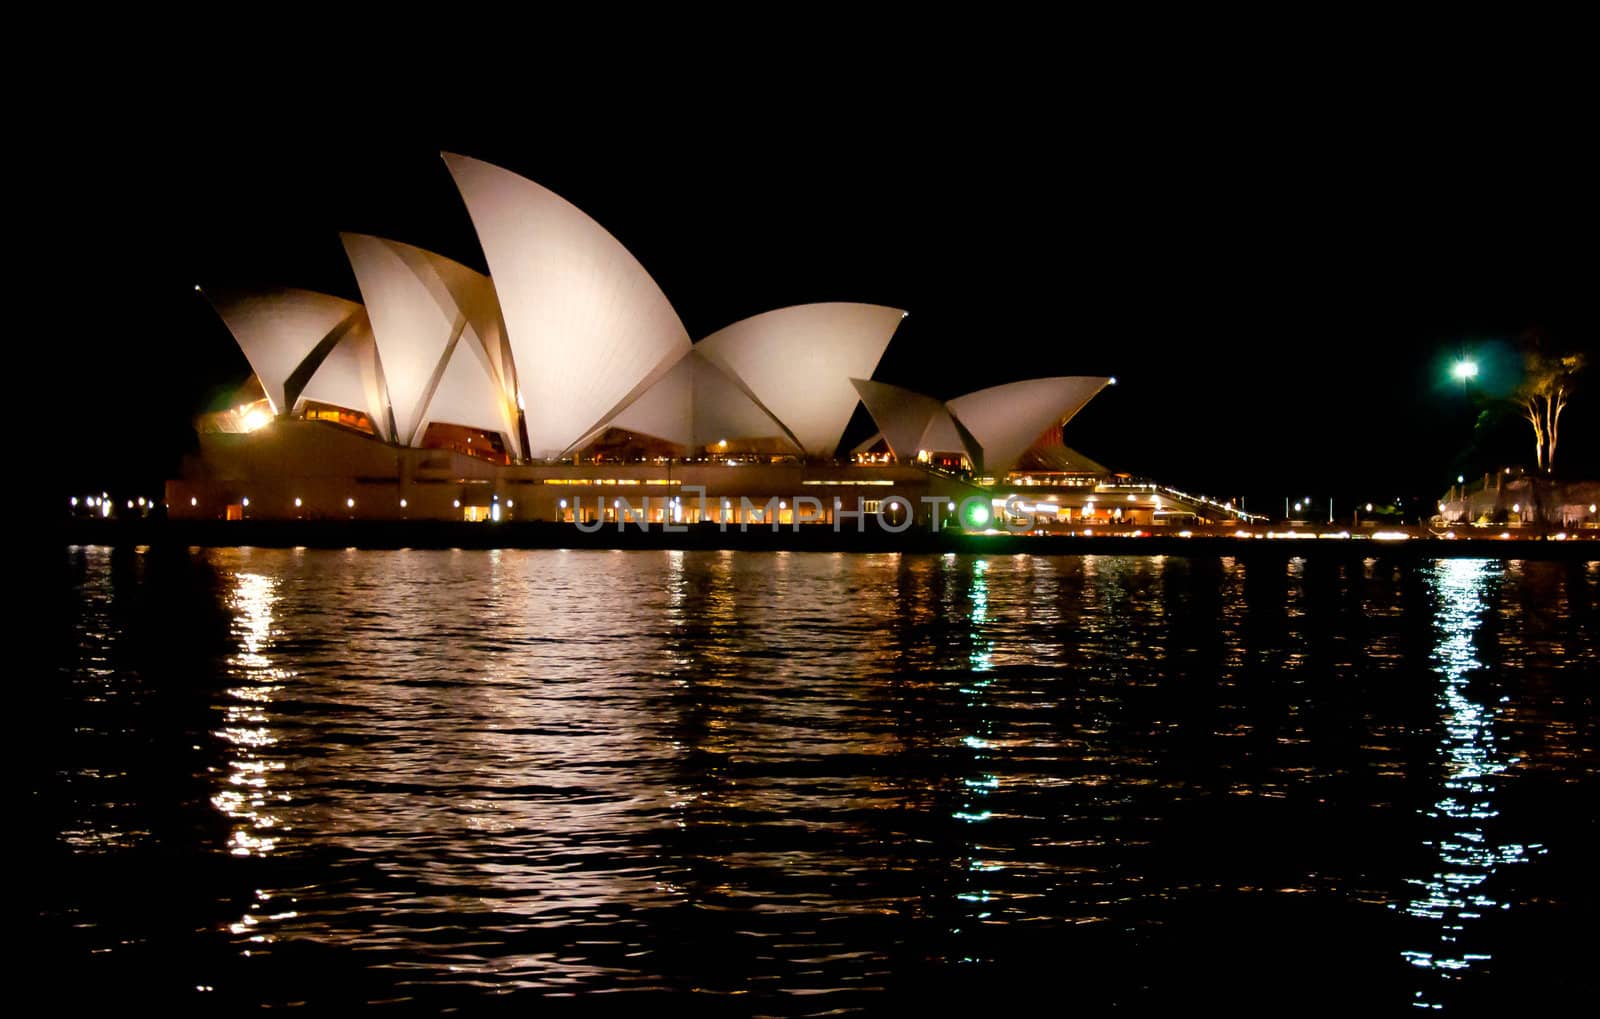 SYDNEY, AUSTRALIA  AUGUST 18: view of the Opera House in Sydney bay on August 18, 2010 in Sydney, Australia. The Opera House Theatre is a famous landmark for Sydney and for whole australia